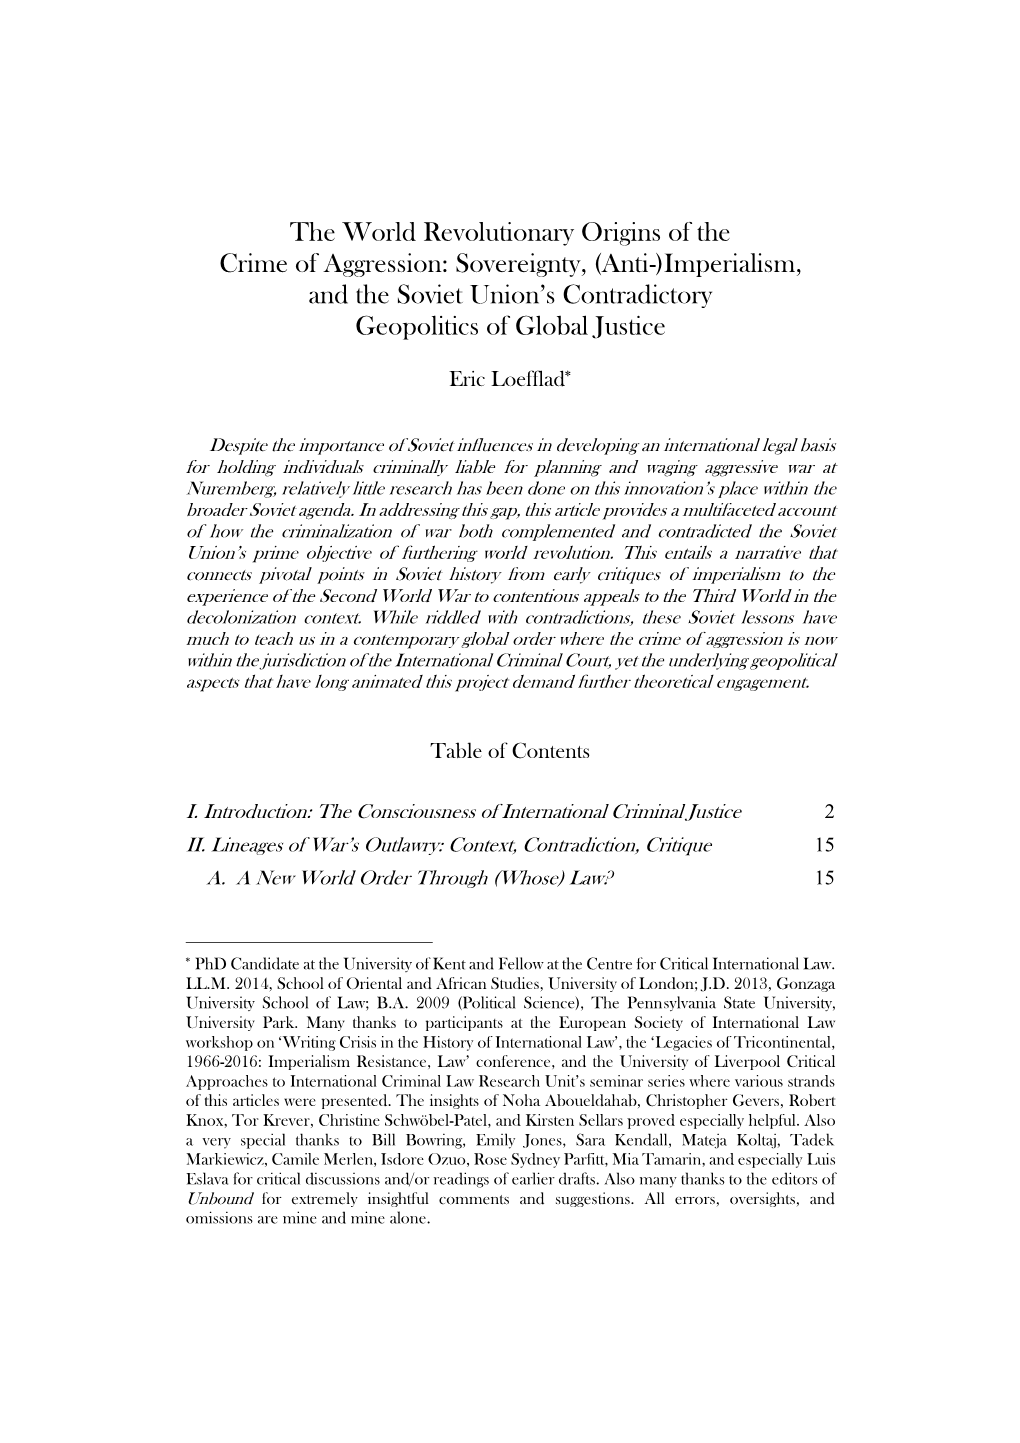 The World Revolutionary Origins of the Crime of Aggression: Sovereignty, (Anti-)Imperialism, and the Soviet Union’S Contradictory Geopolitics of Global Justice